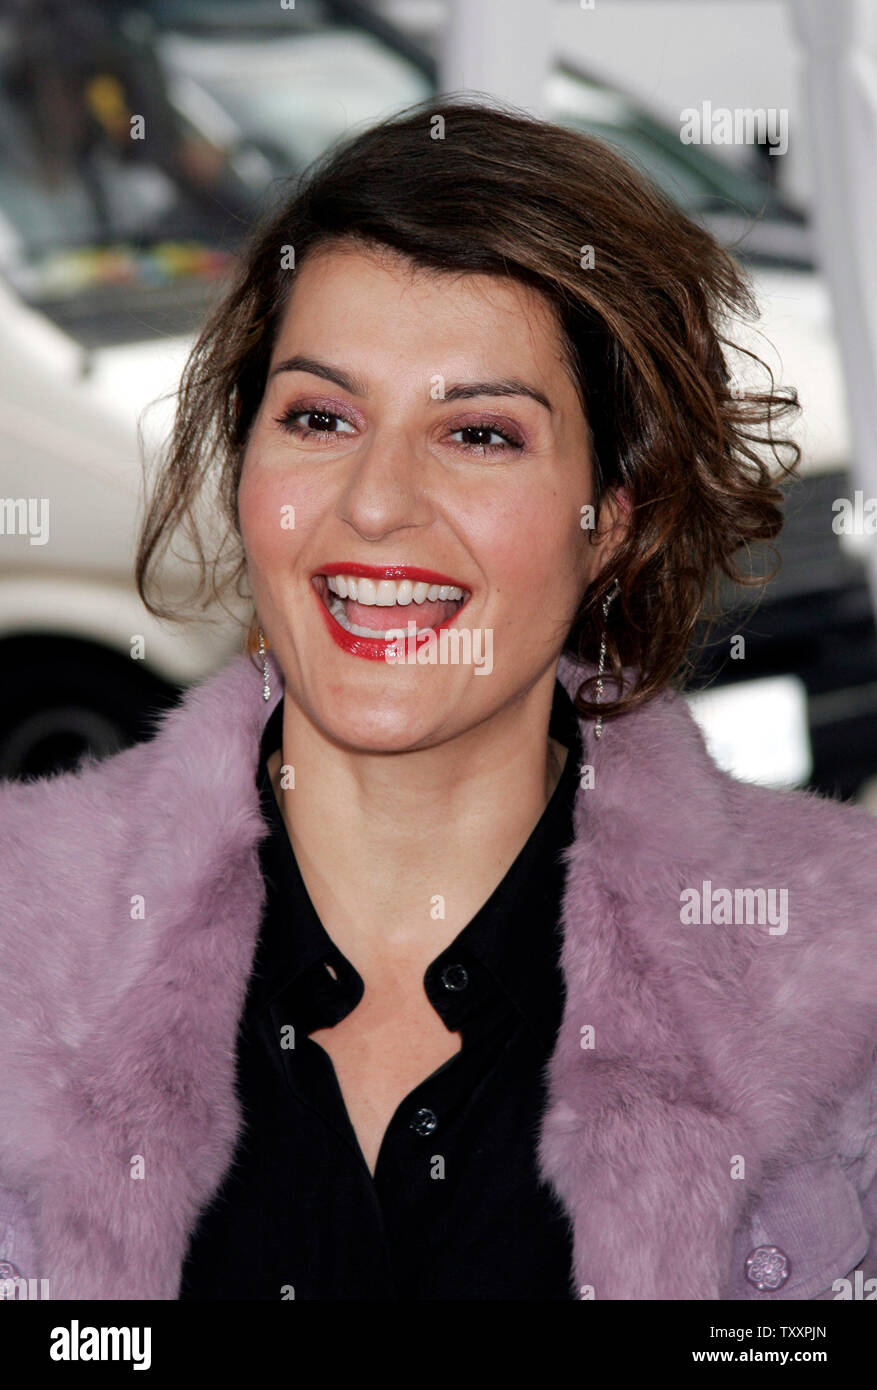 Actress Nia Vardalos arrives as a guest at the November 7, 2004 Los Angeles  premiere of the new animated film 'Polar Express'. The film, starring Tom Hanks, is  based on the children's book of the same name and directed by Robert Zemeckis, opens in the United States November 10. (UPI Photo/Francis Specker) Stock Photo